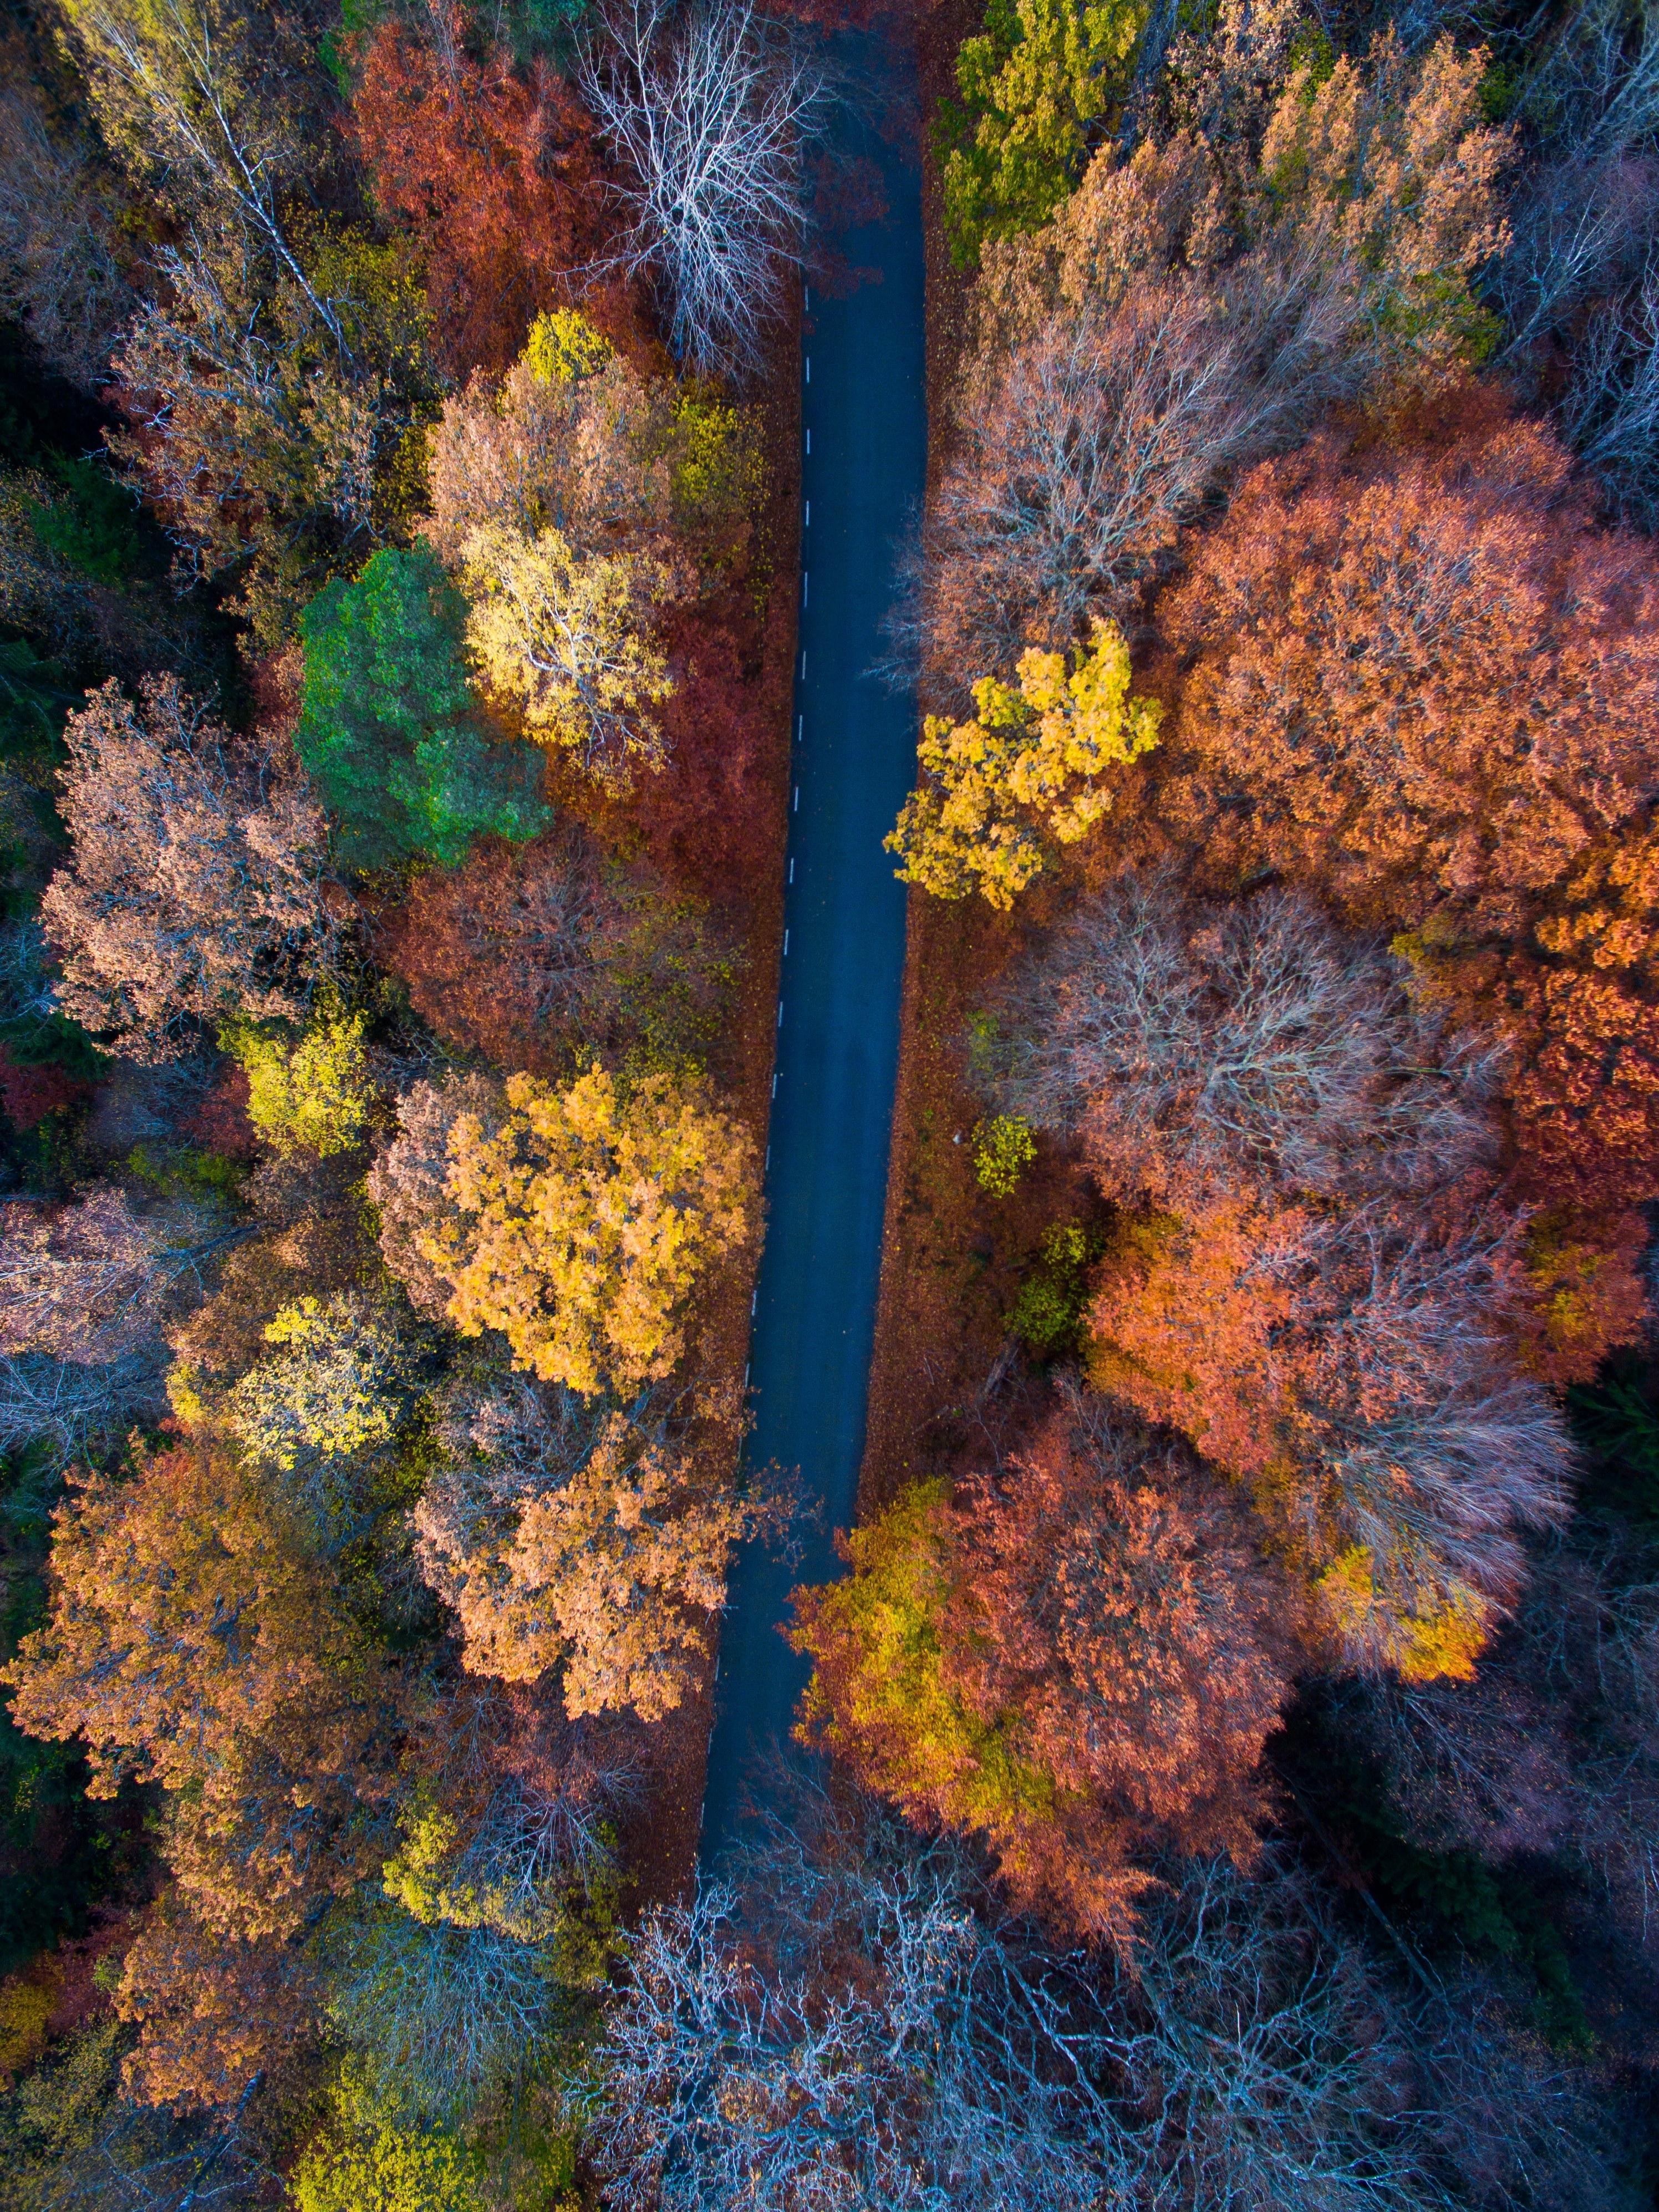 Wallpaper / a drone shot of a road between rows of autumn trees, scenic autumn road 4k wallpaper